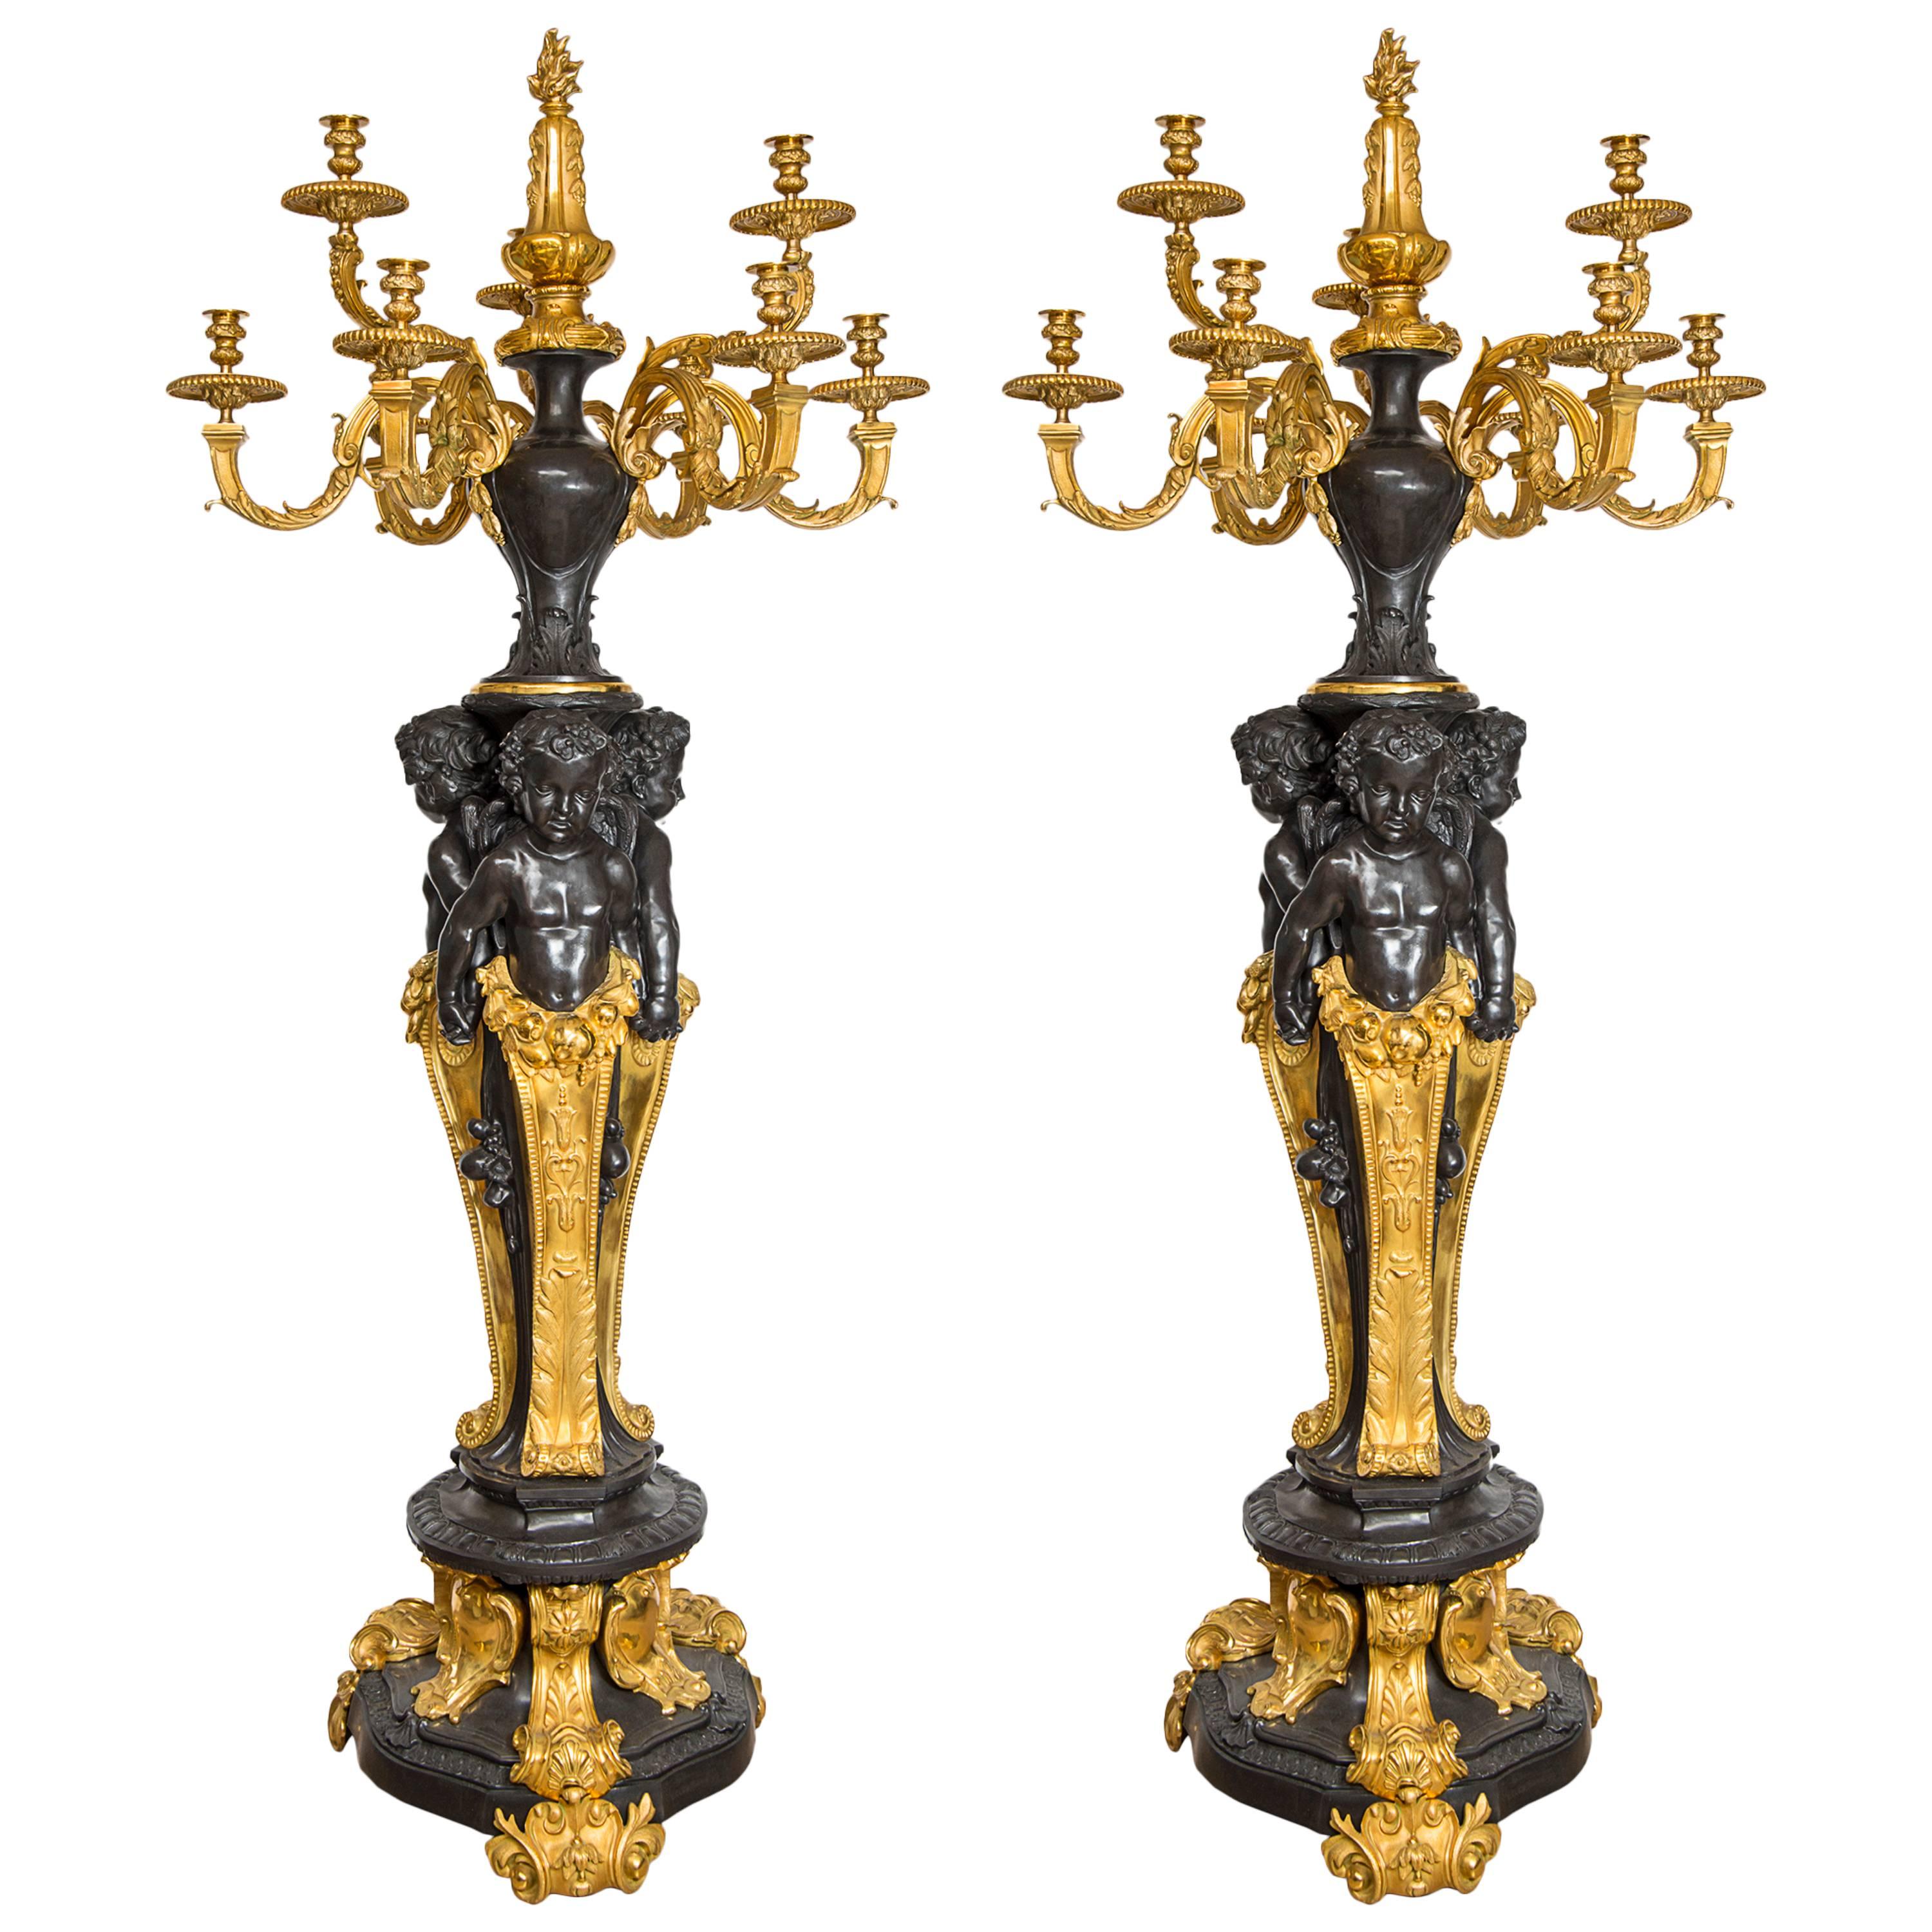 Very Important Pair of Candelabra "Aux Amours" After Carrier-Belleuse Style For Sale